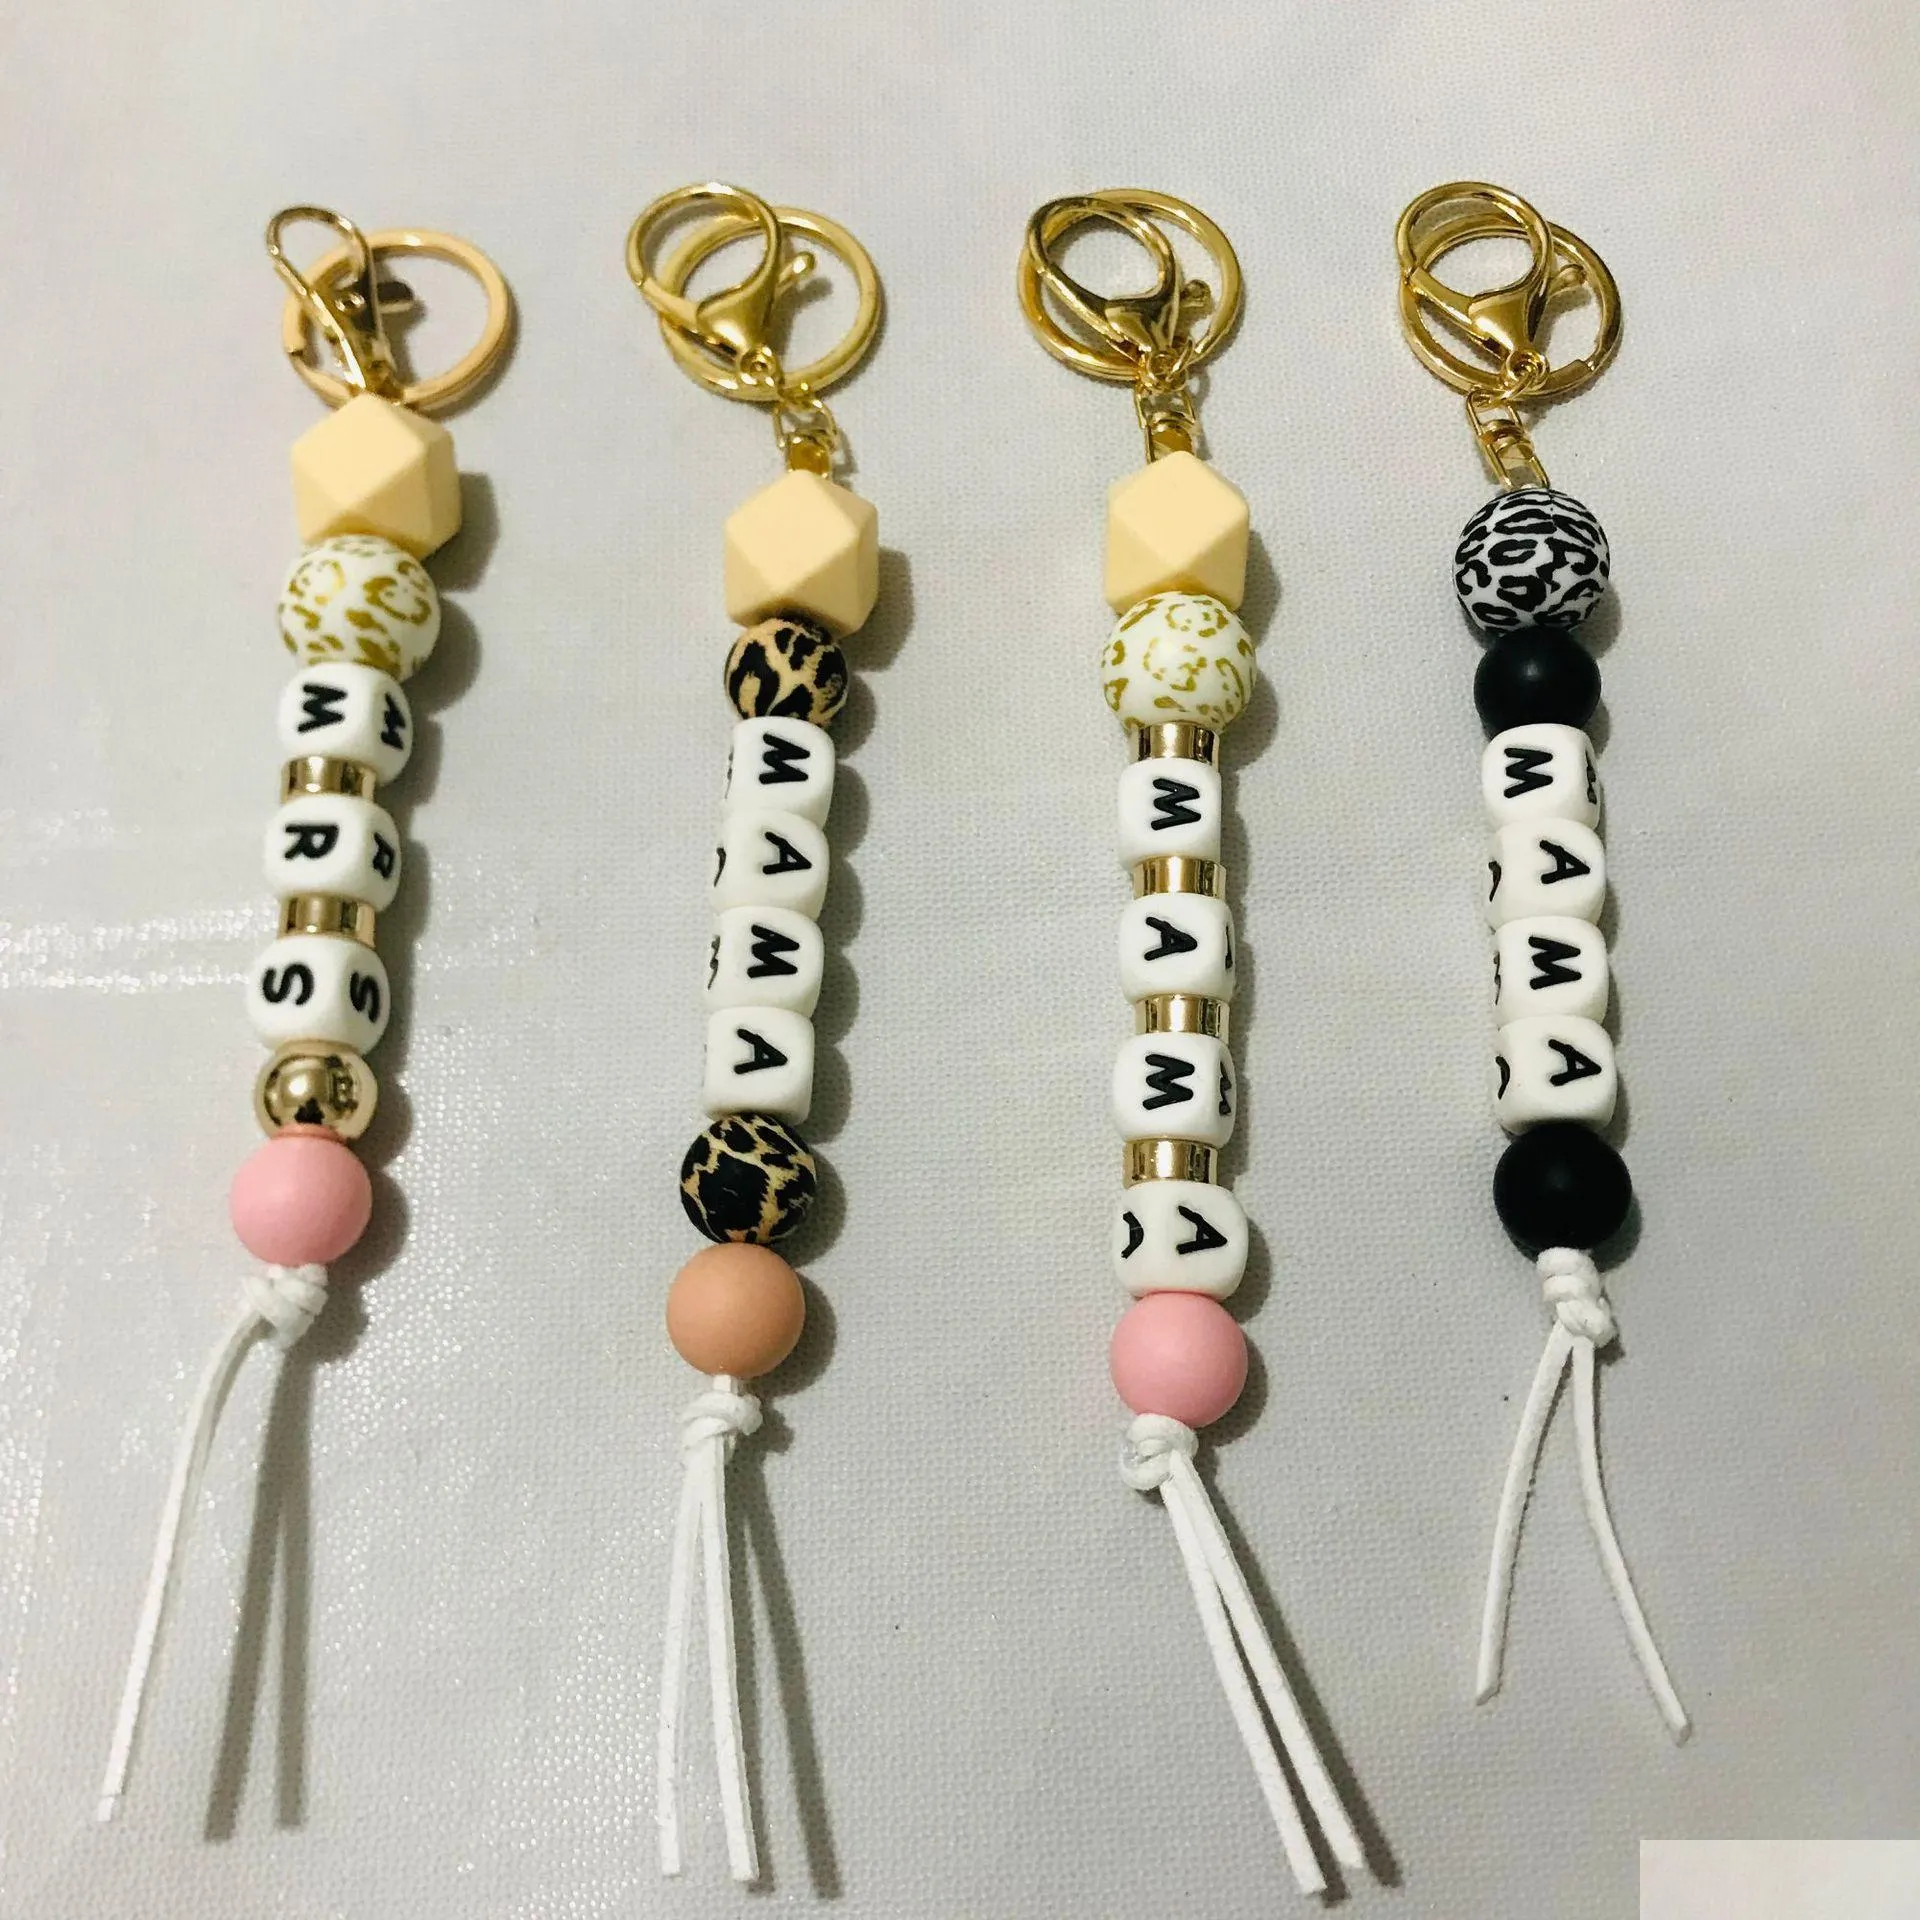 ups fast european and american fashion letters party favor silicone beads key chain bag accessories pendant